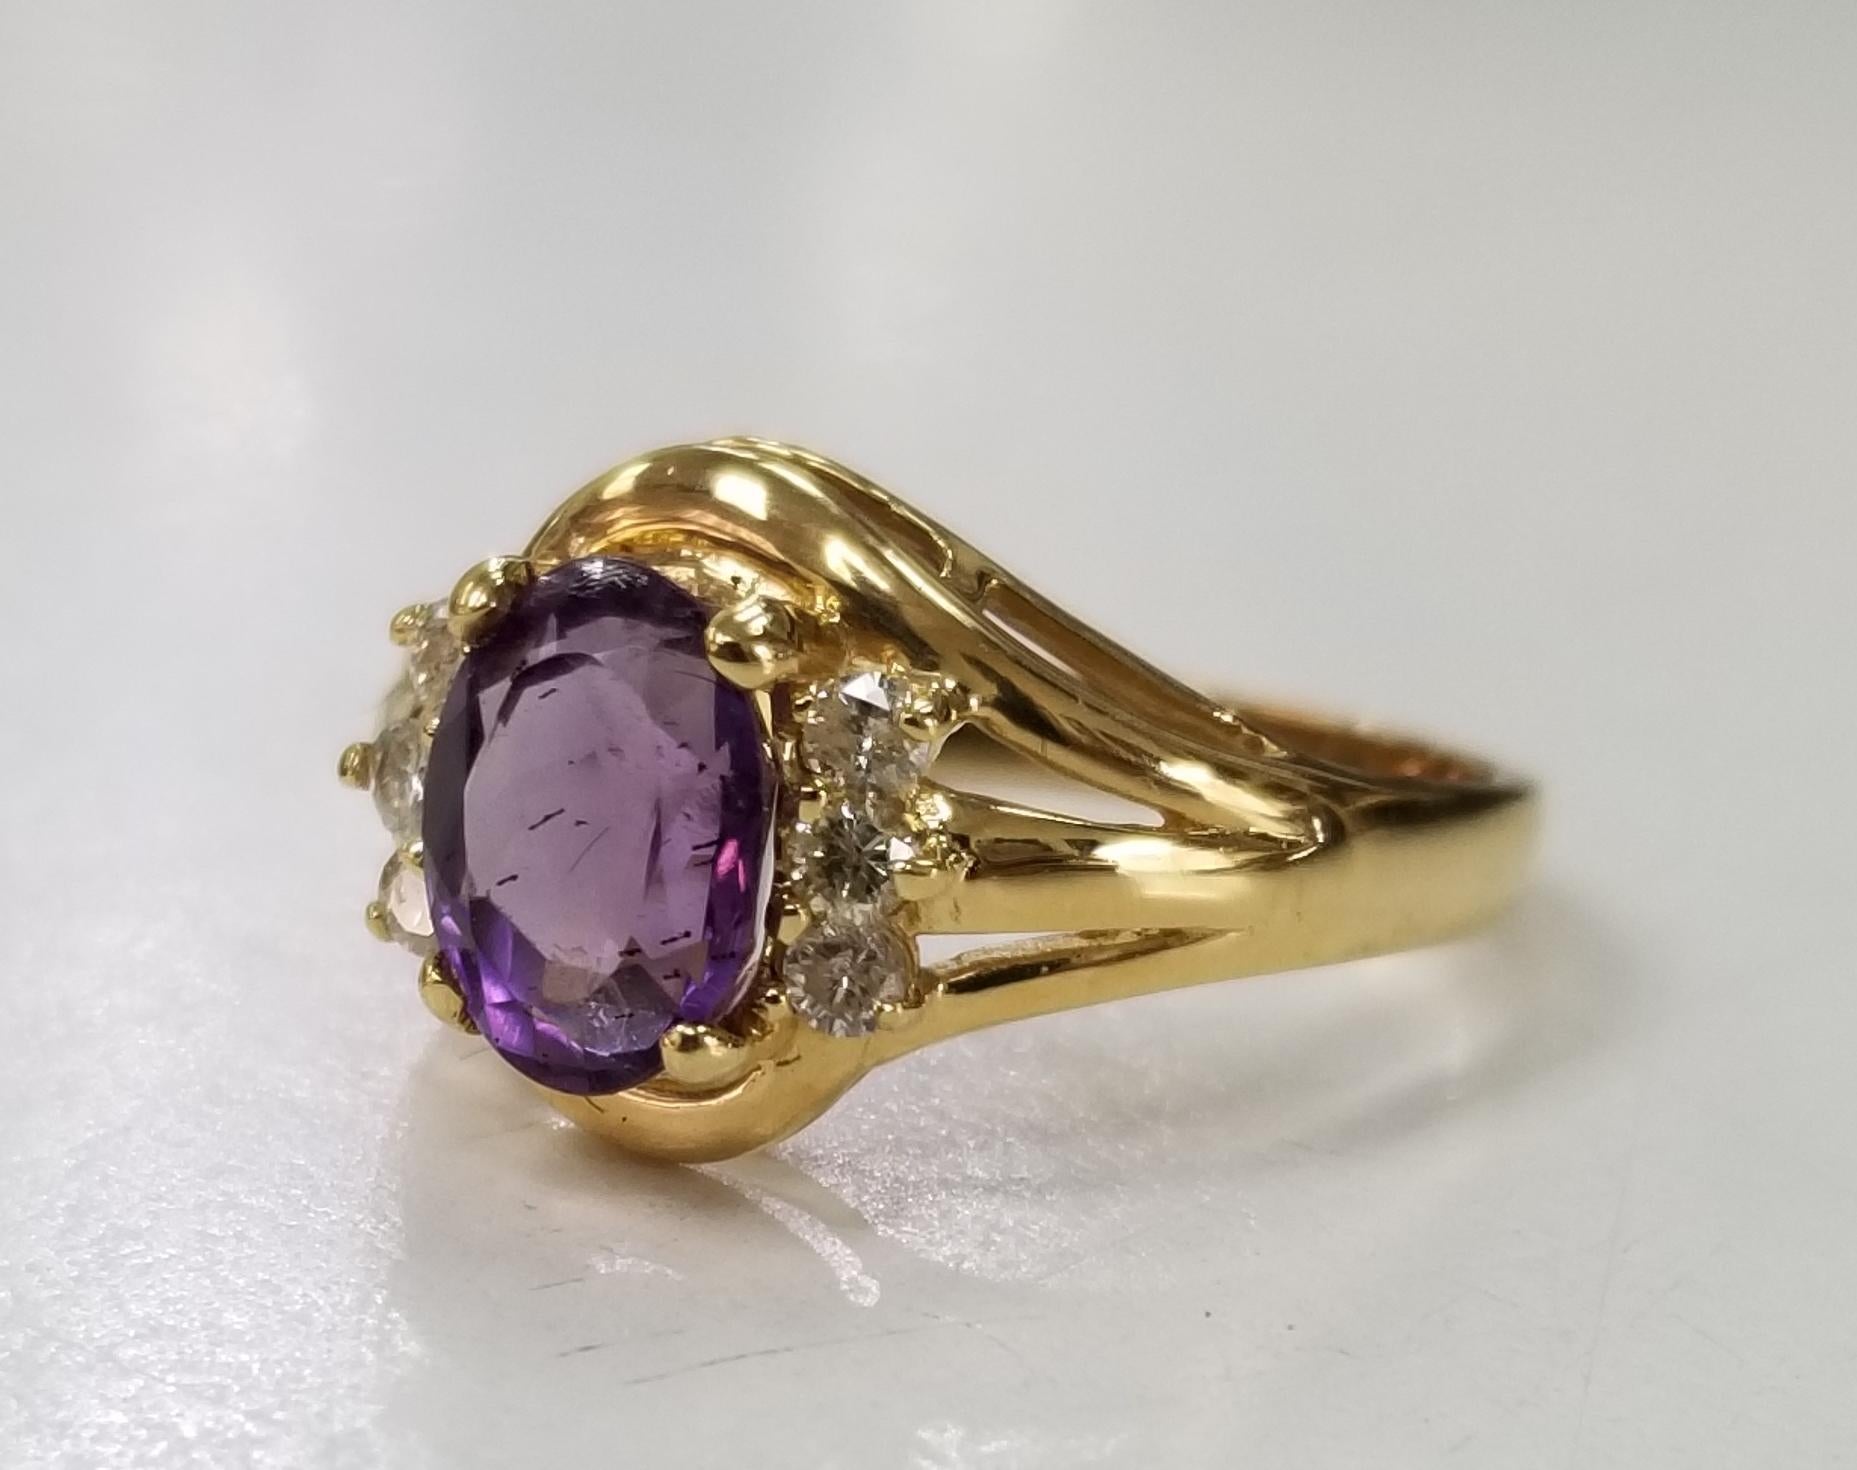 14k yellow gold amethyst and diamond ring, containing 1 oval cut amethyst of gem quality weighing .1.35cts. and 6 round full cut diamonds of very fine quality weighing .18pts.  This ring is a size 5.75 but we will size to fit for free.